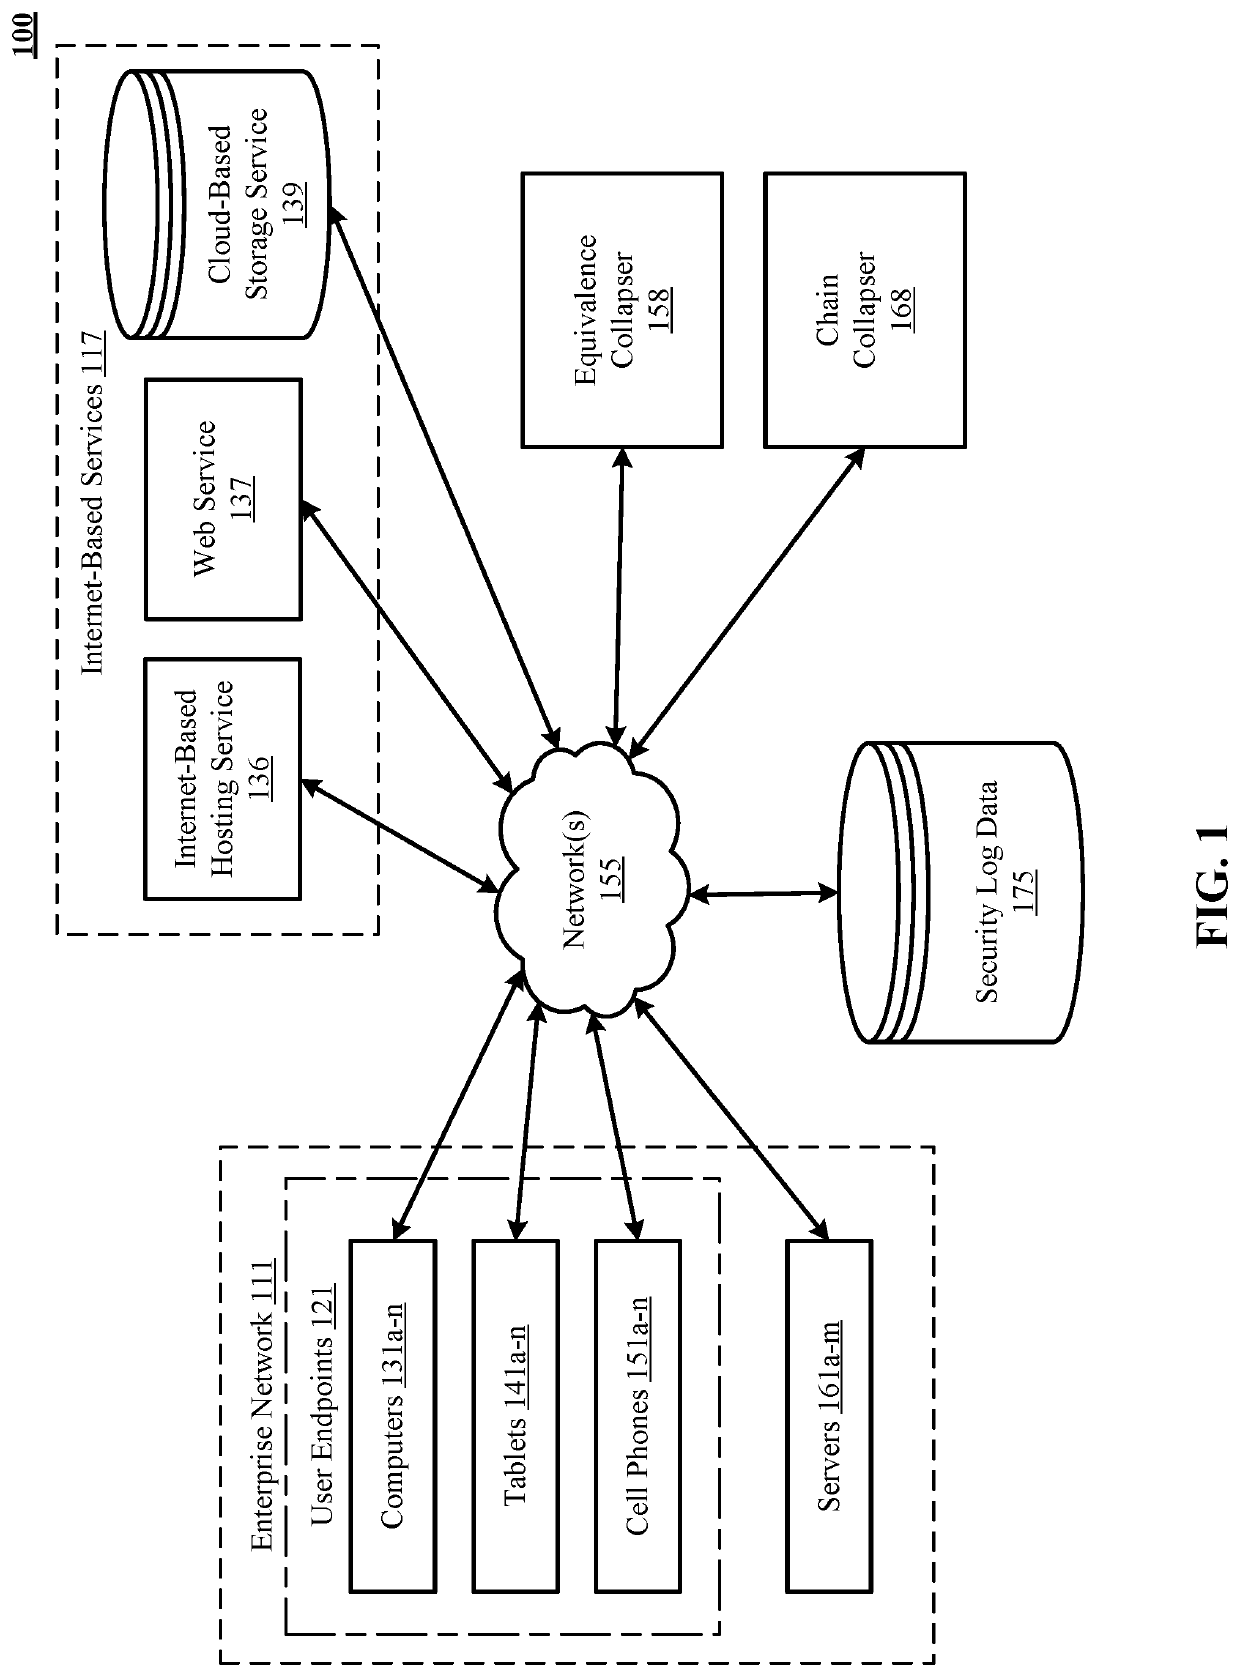 Systems and methods to show detailed structure in a security events graph